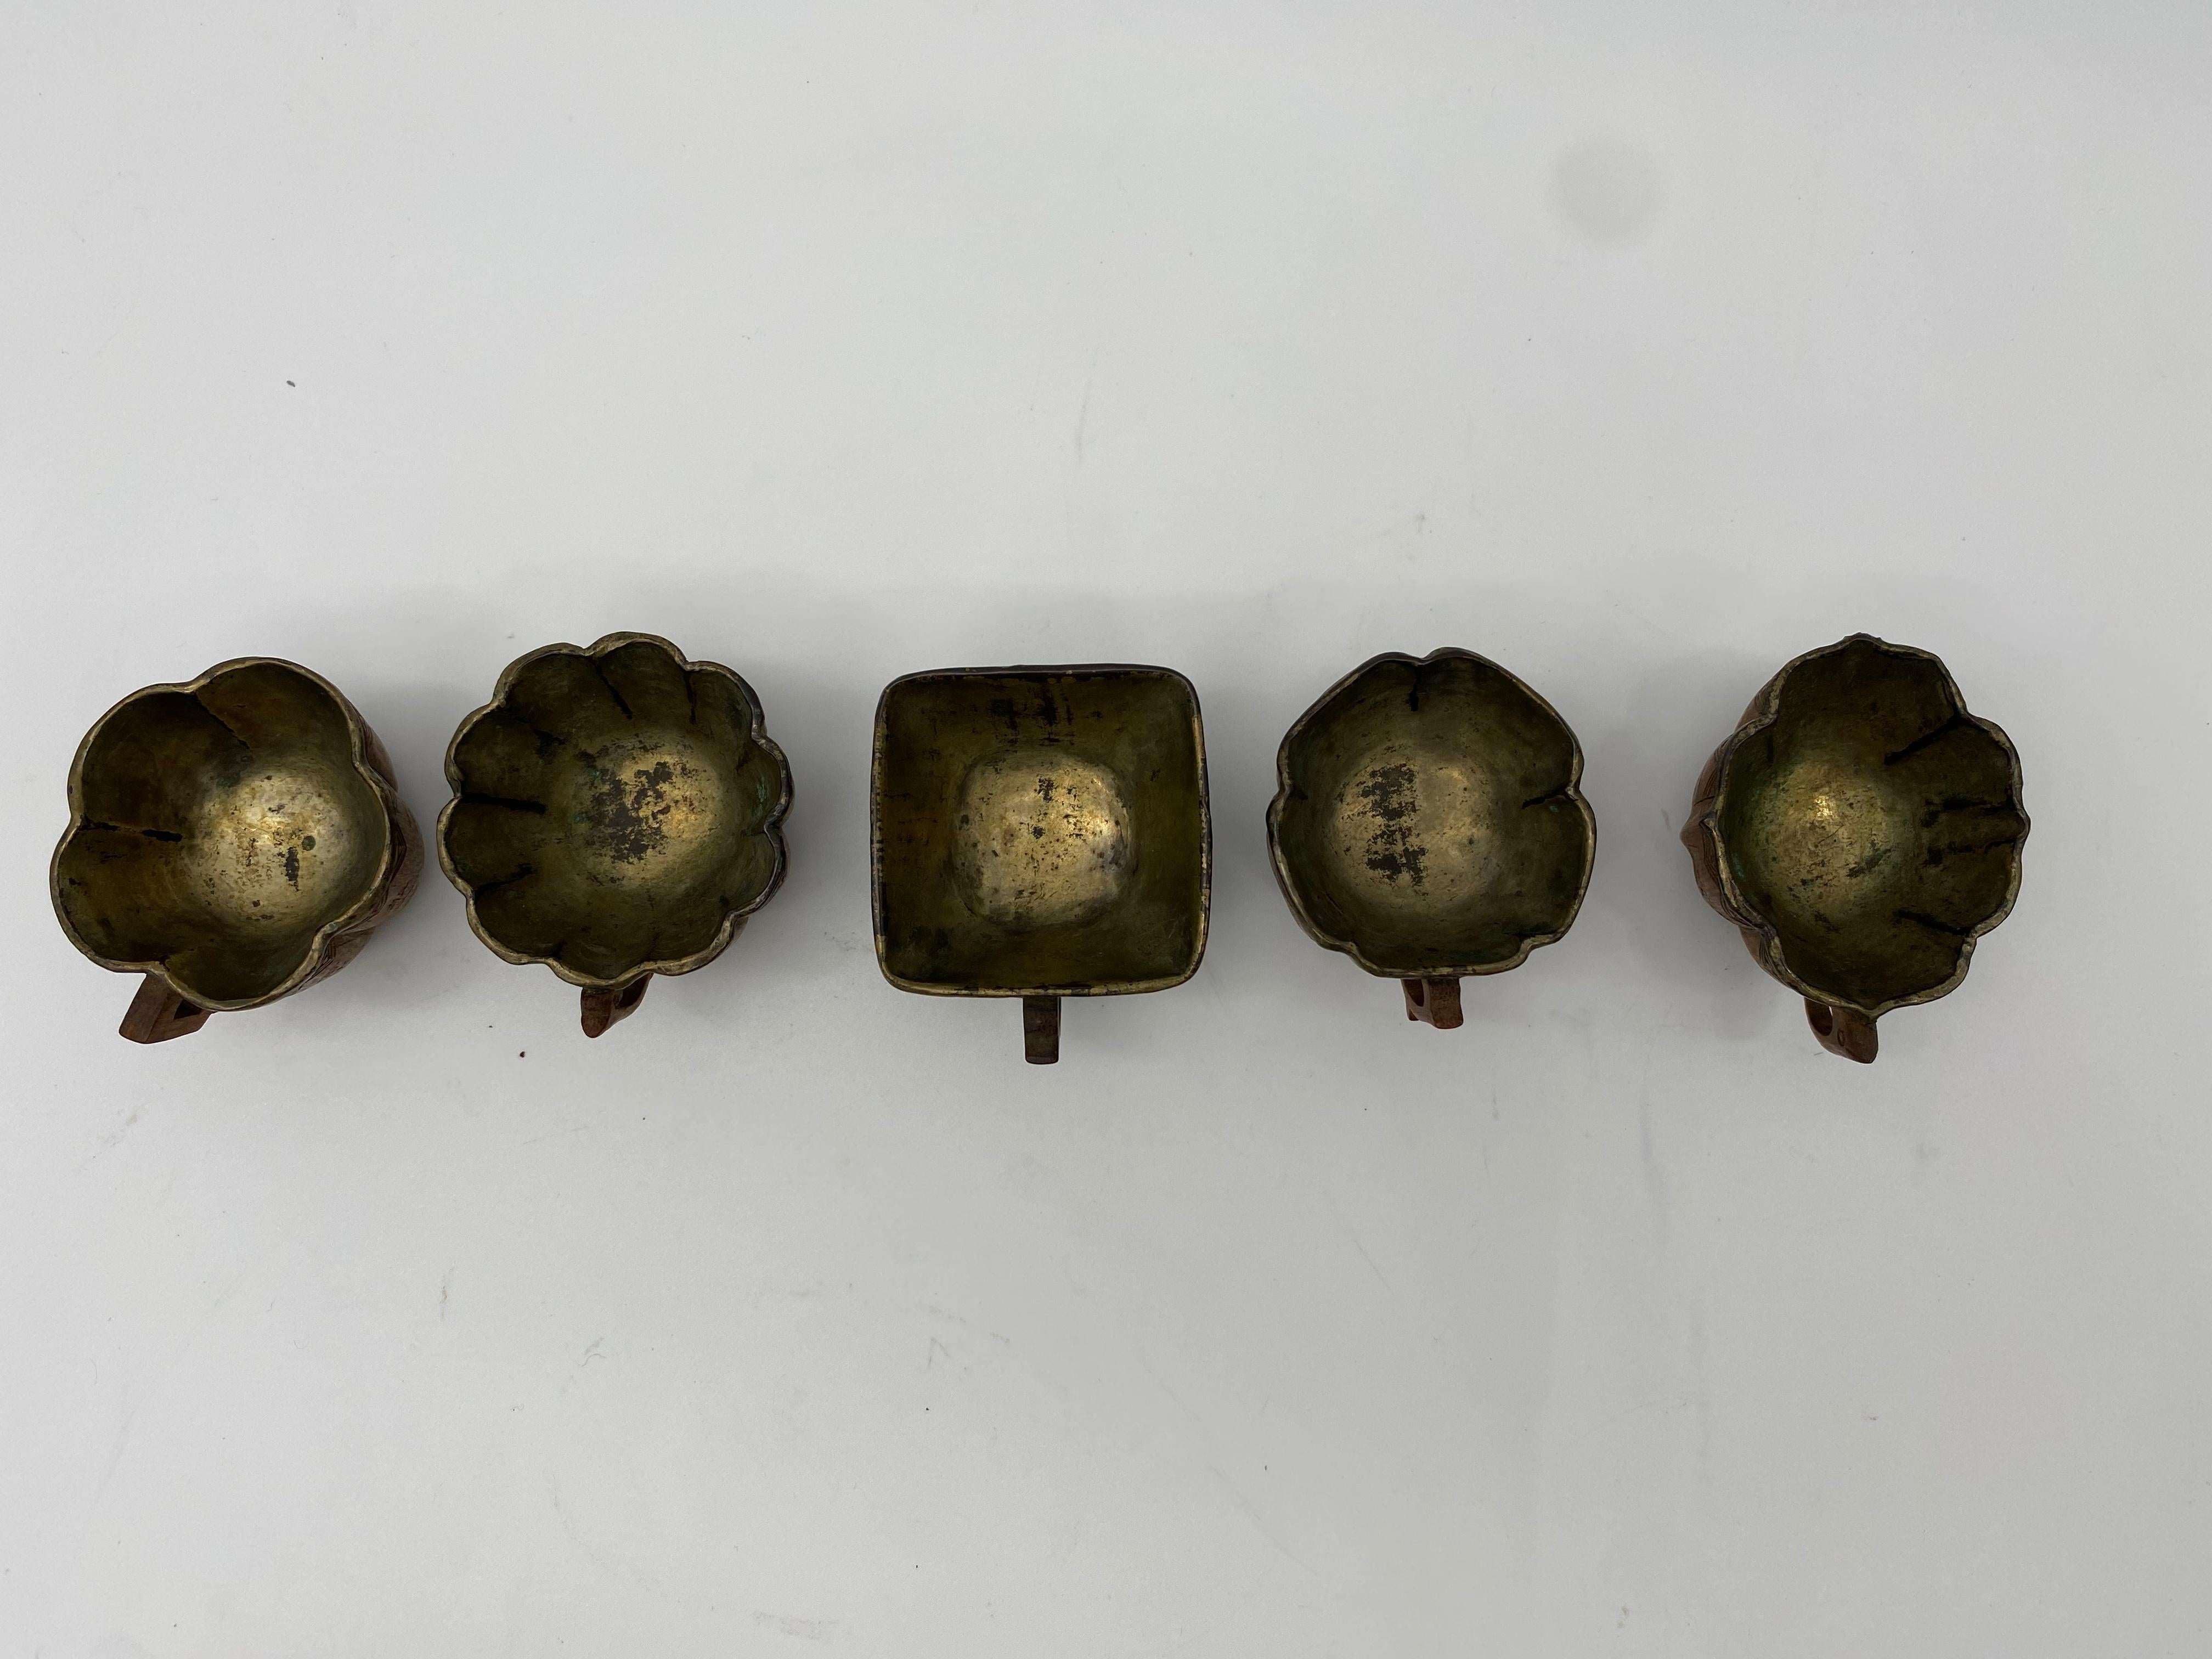 A fine set of 5pieces Chinese bamboo tea cups with silvered interiors from the 17th century Qing Dynasty, the faces each of each decorated to the exterior bamboo with Chinese words , all with carved floral depictions and inscribe poems , interior is